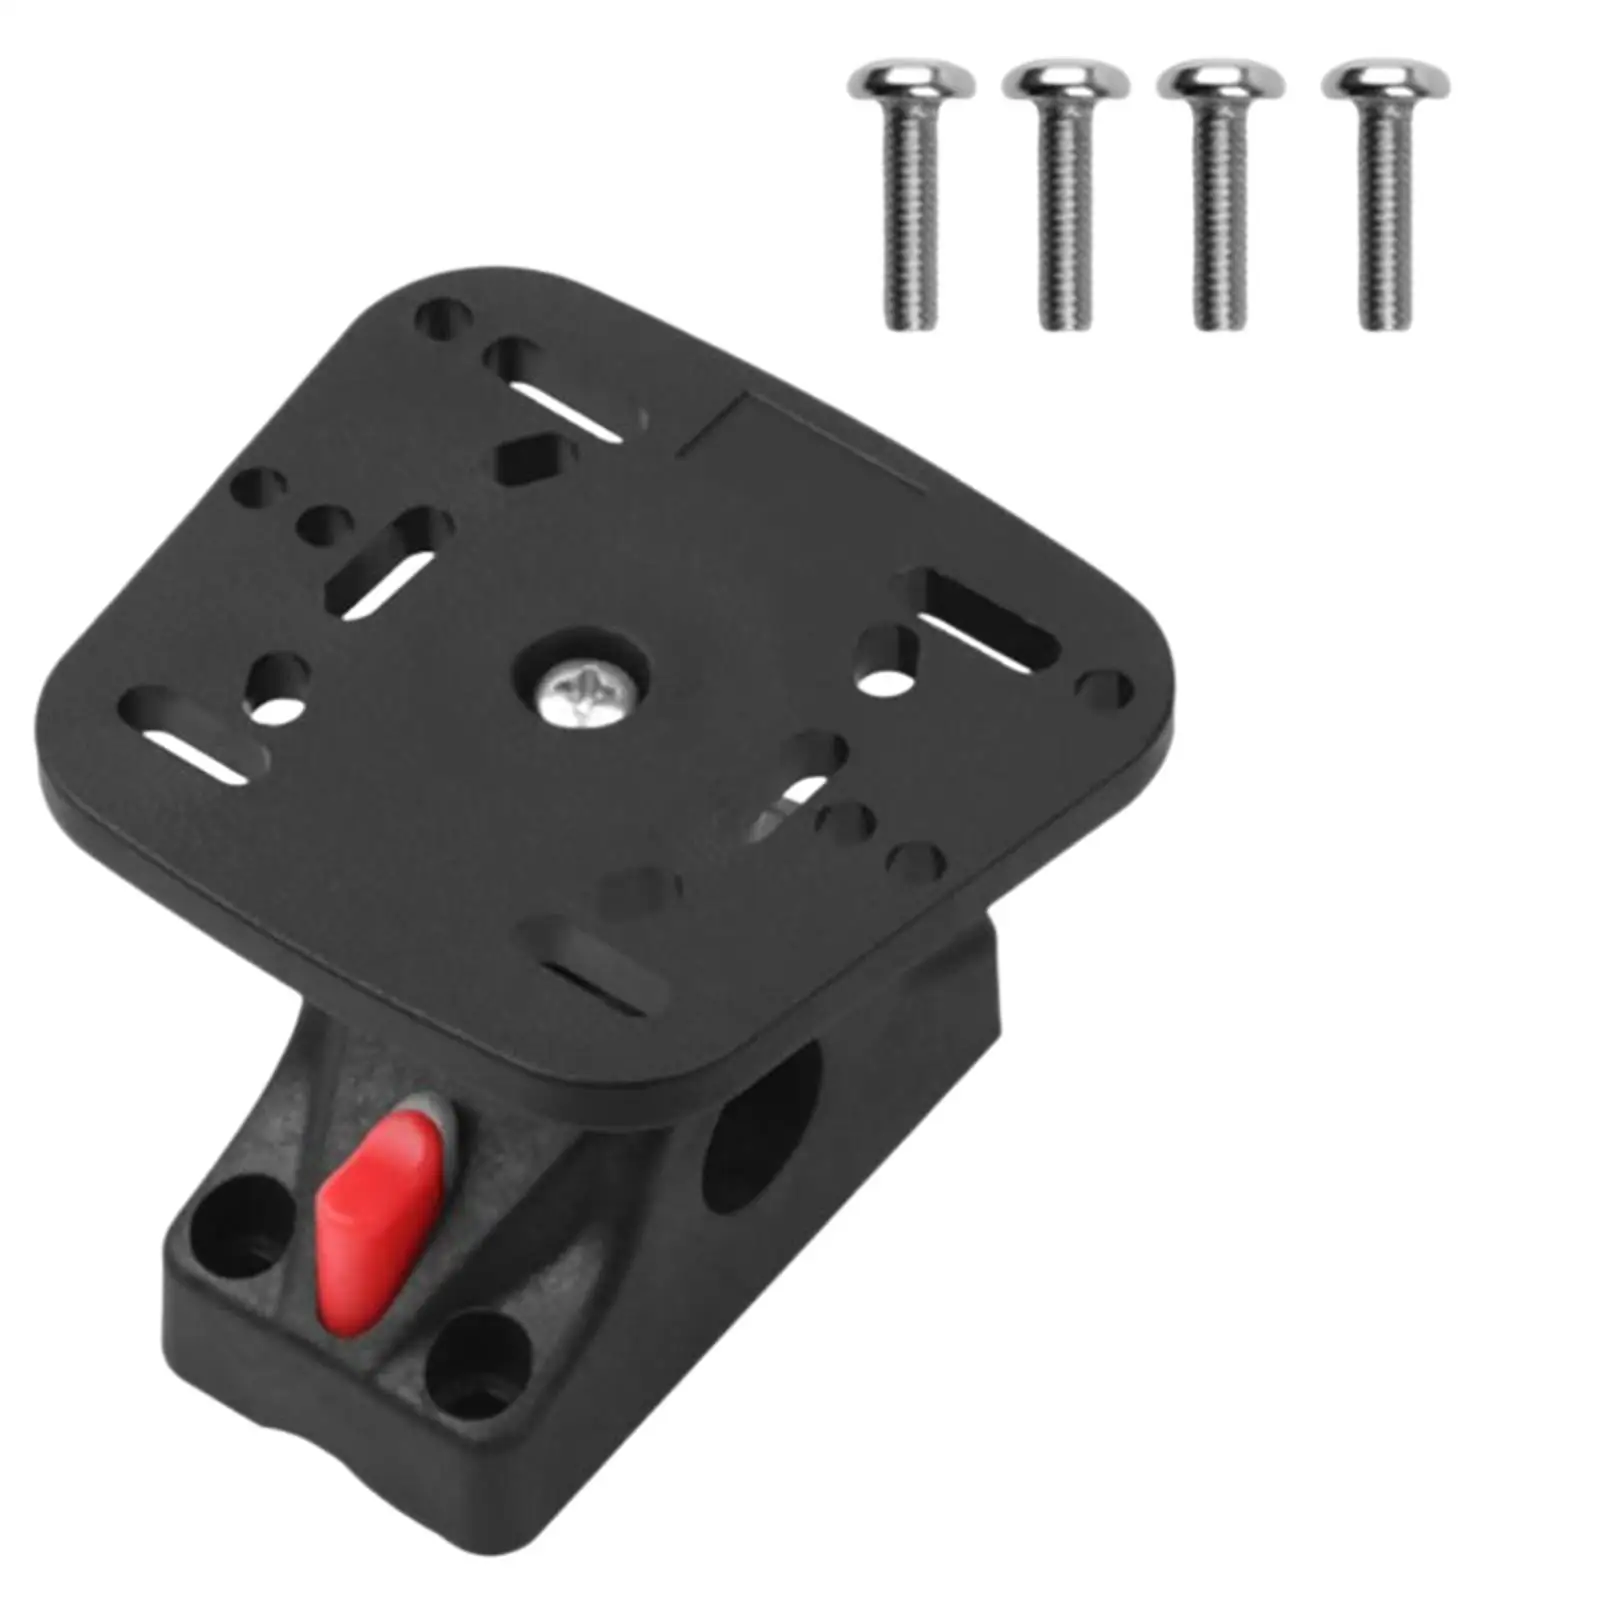    Mount Quick Disassembly Adjustable Durable for Kayak Accessories